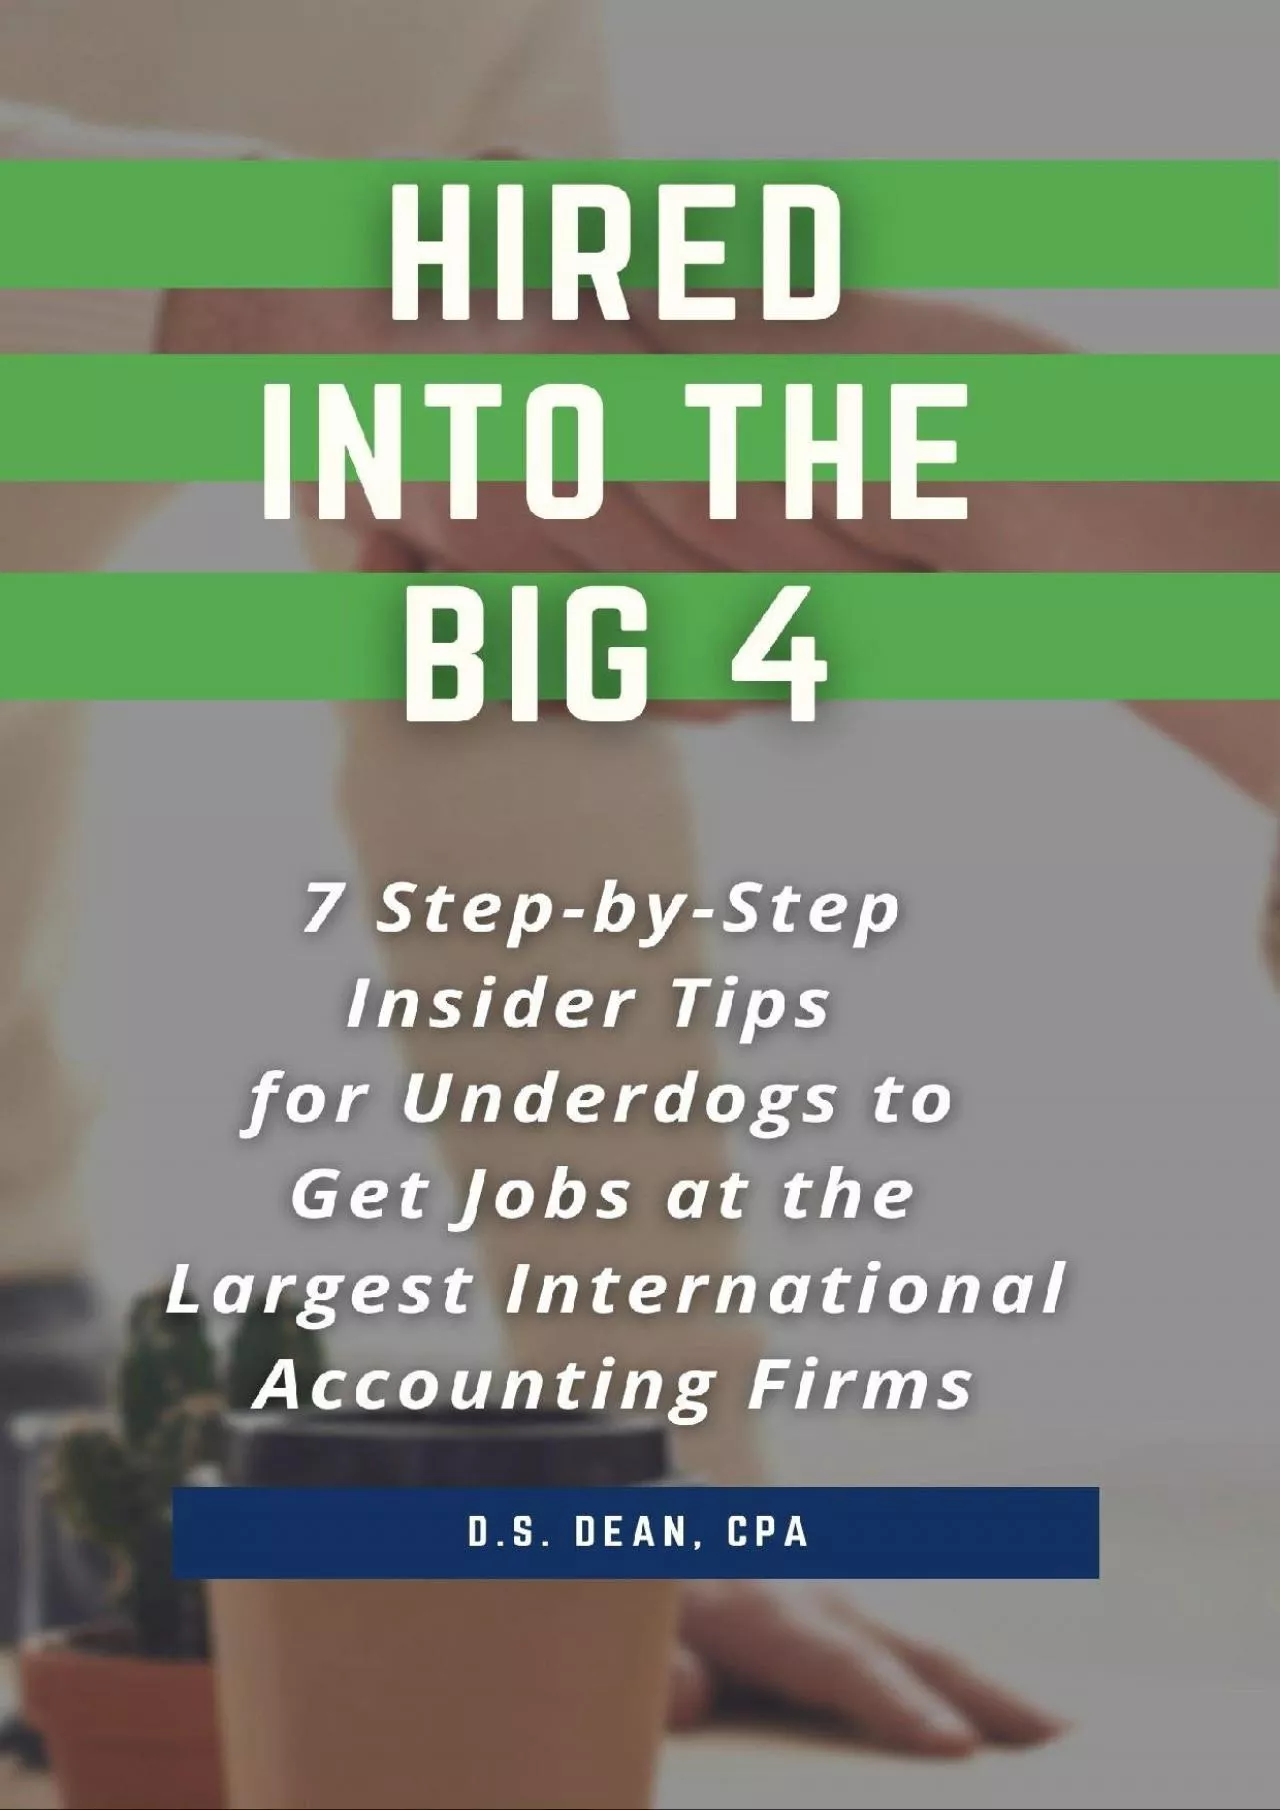 HIRED INTO THE BIG 4: 7 Step-by-Step Insider Tips for Underdogs to Get Jobs at the Largest